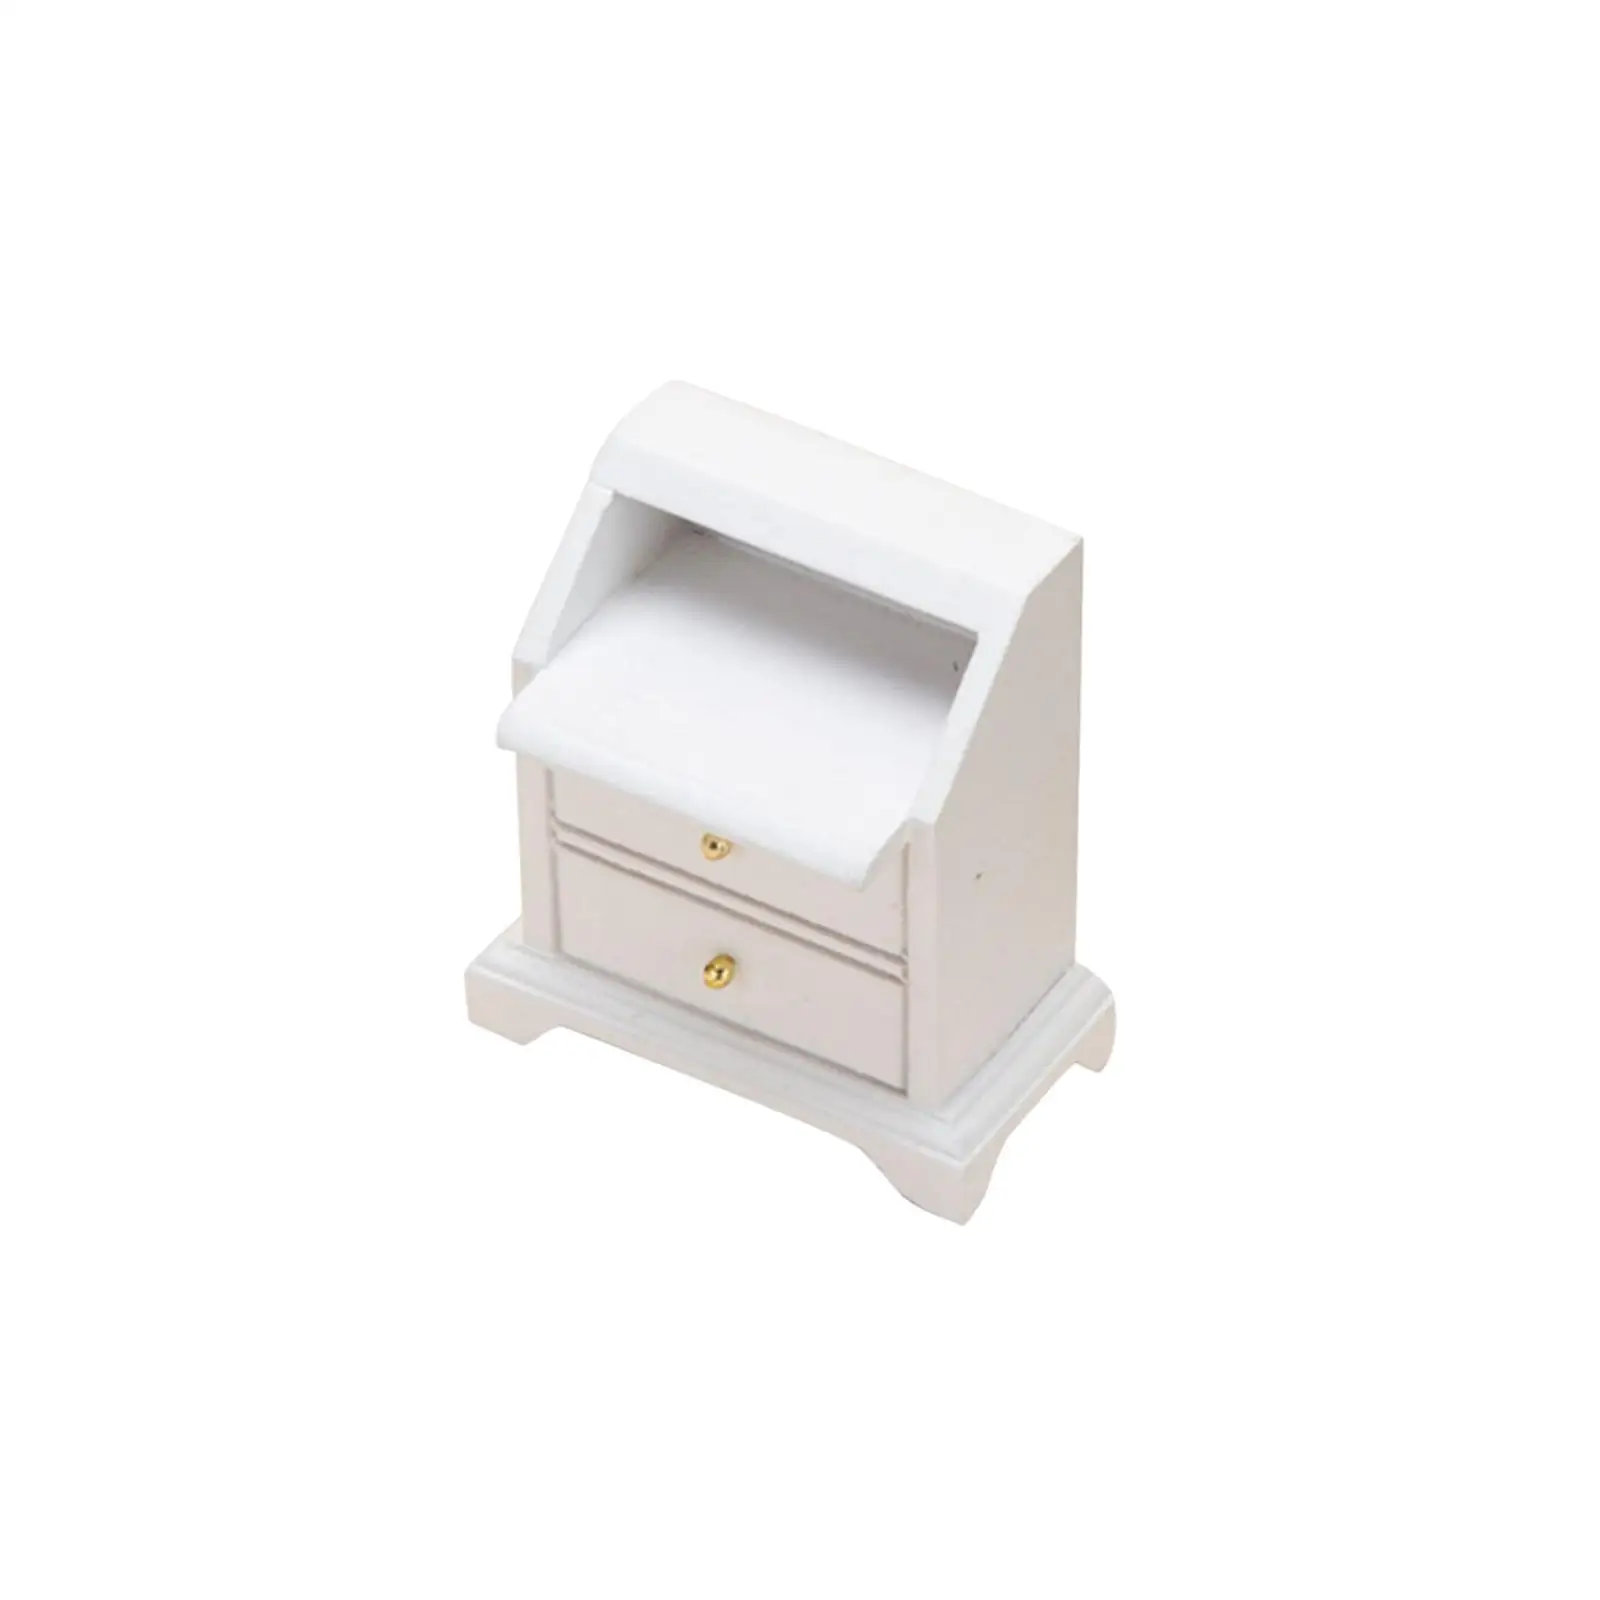 1/12 Scale Dollhouse NightStand Storage Model for Bedroom Durable